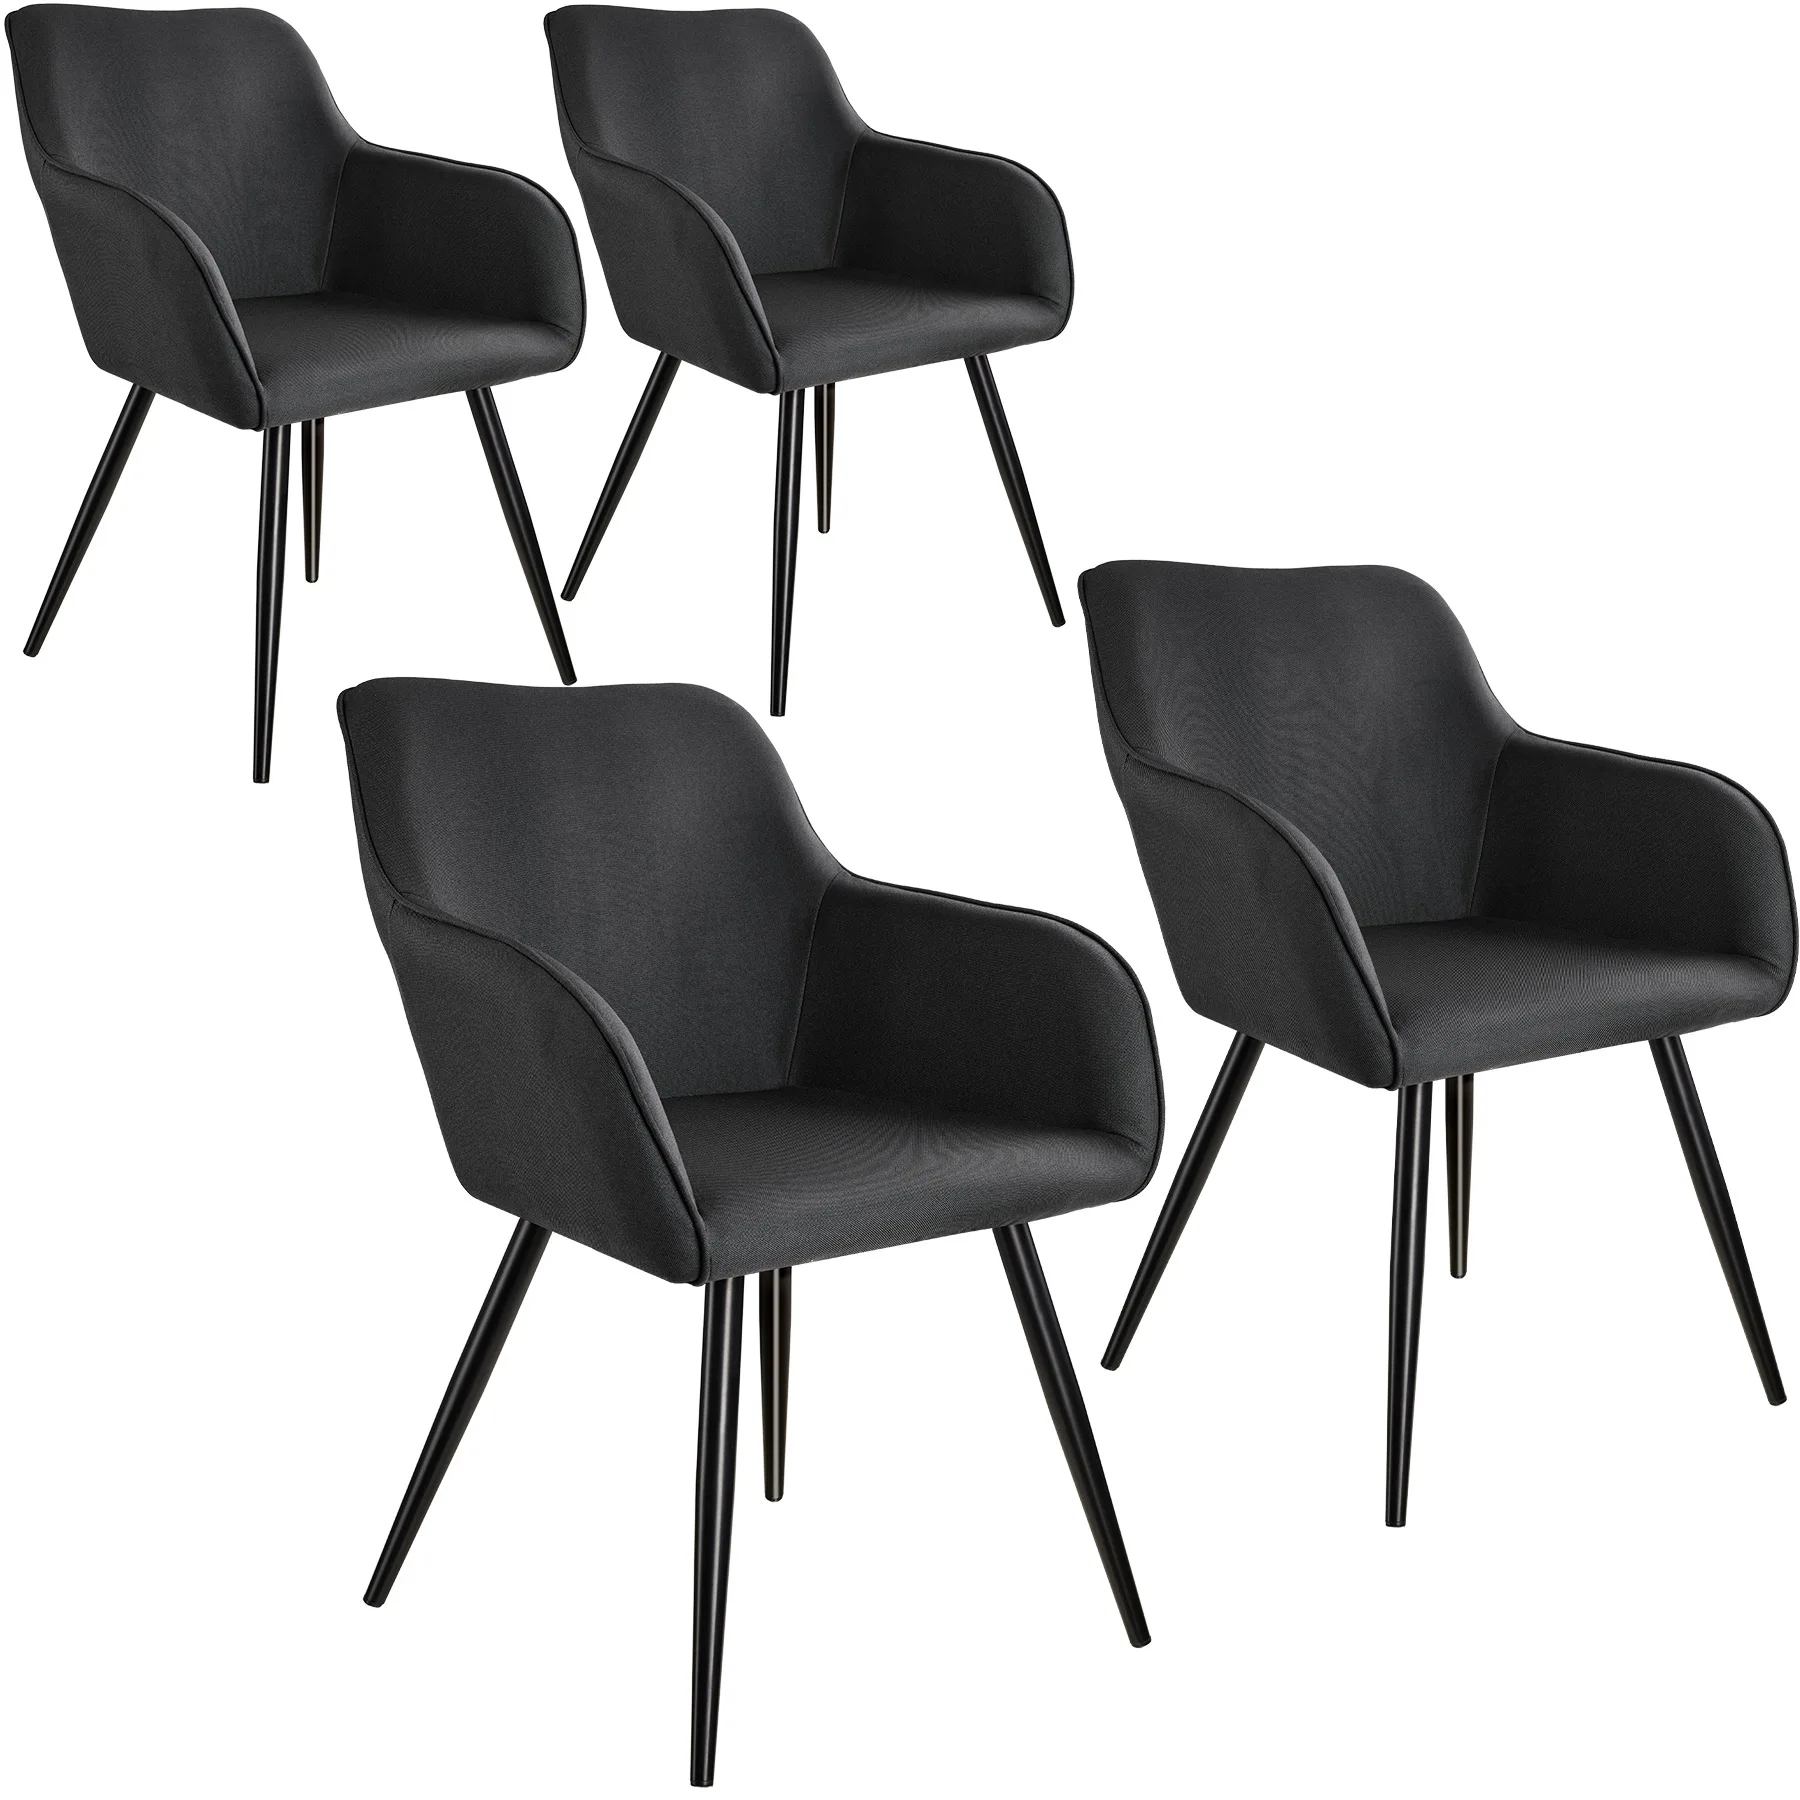 Dierbare schouder Blind vertrouwen Tectake 4 Chairs Marilyn Aspect Black-black Lin - Dining Chairs - AliExpress